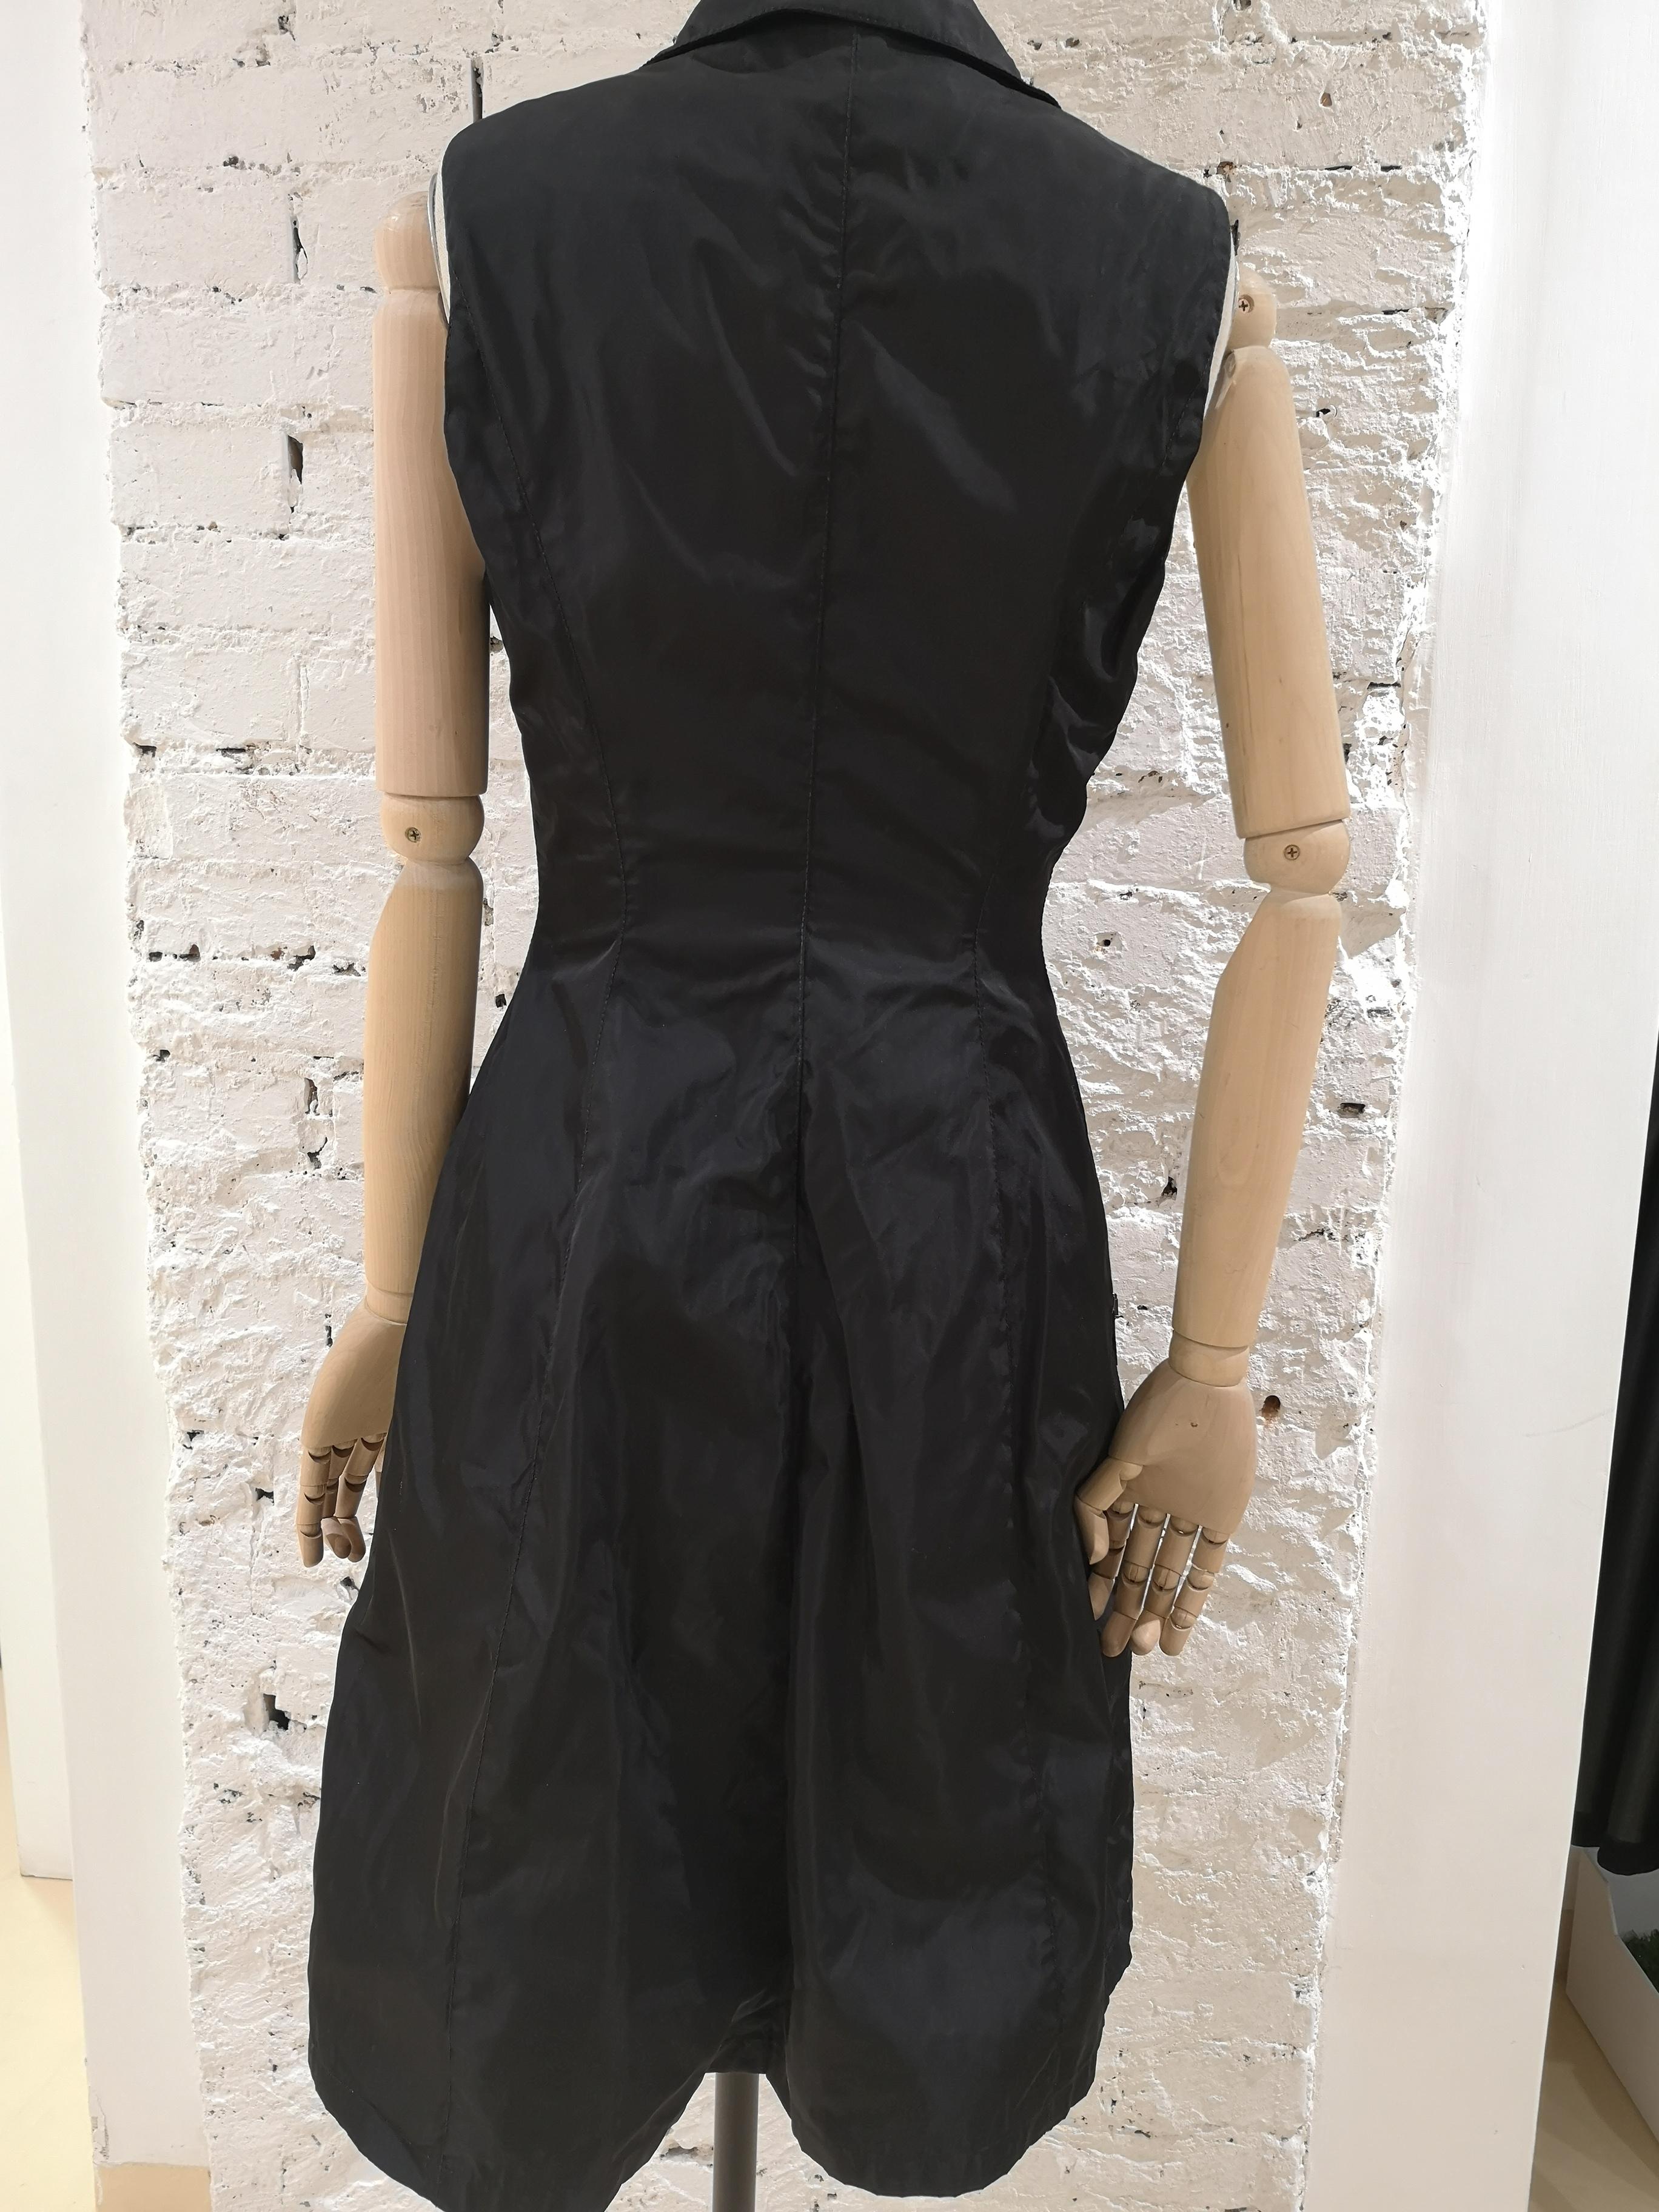 Prada Black Dress
front zip that can be totally open
size Small
Made in Italy